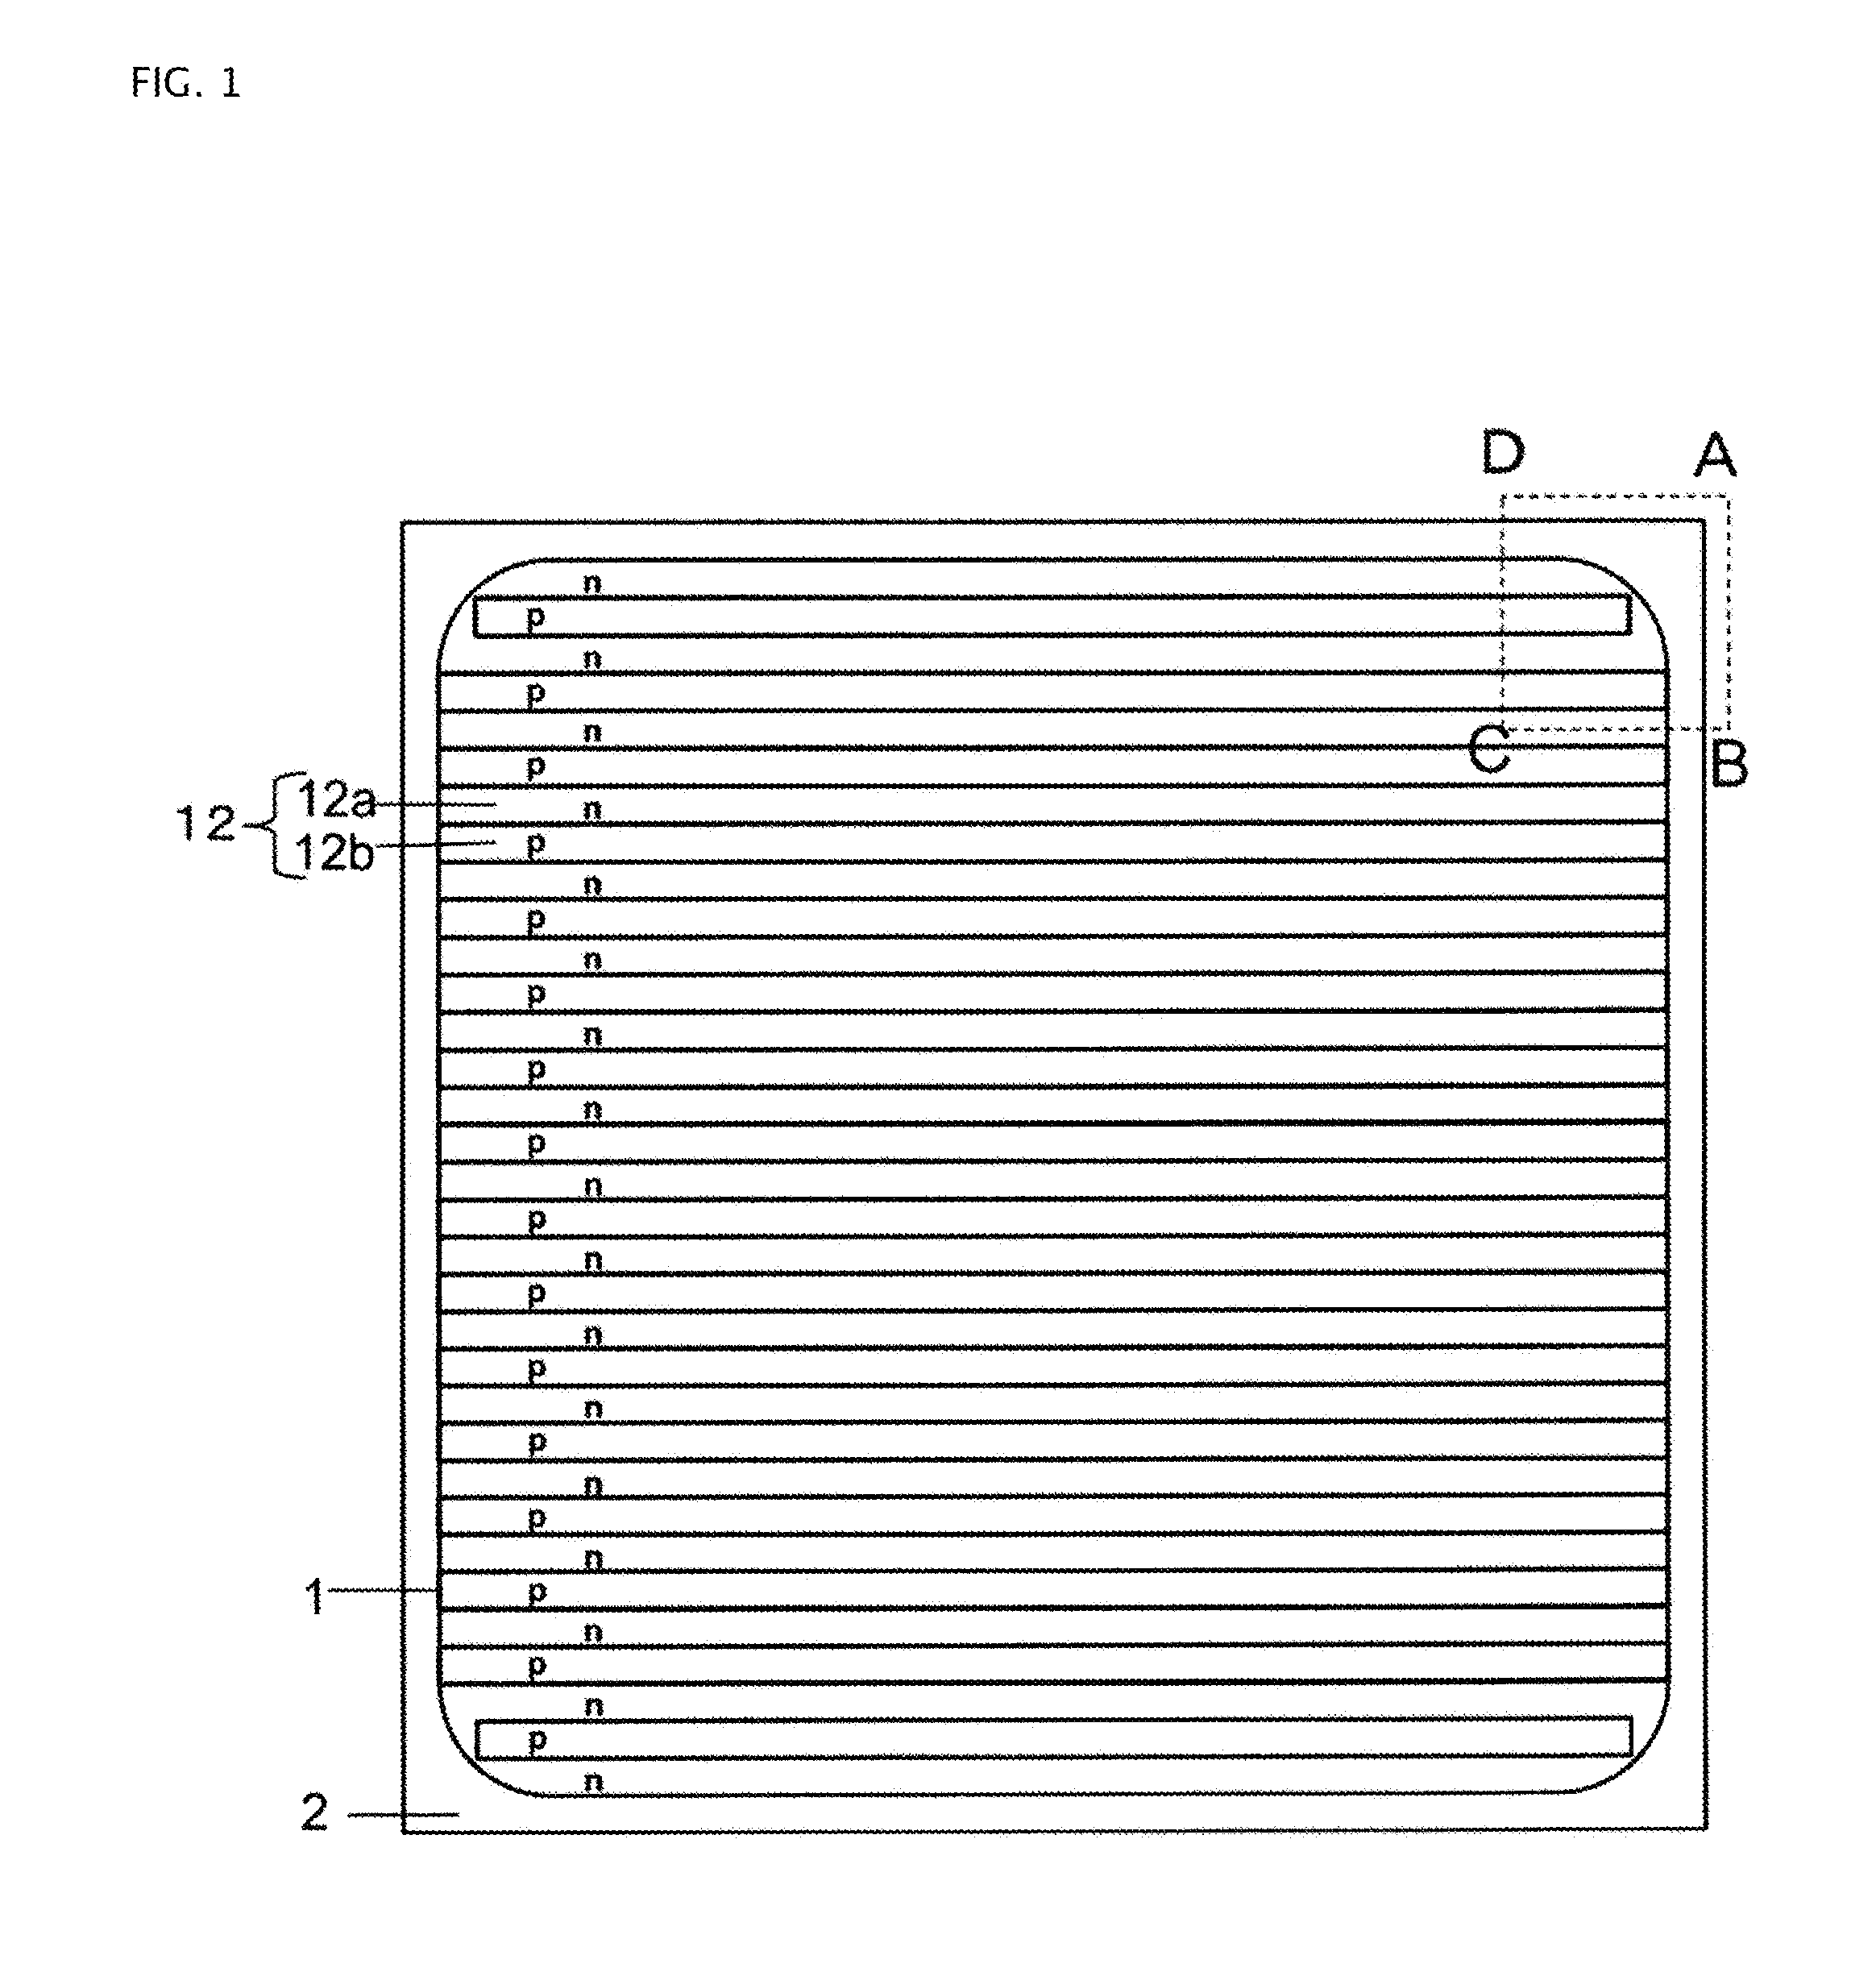 High breakdown voltage semiconductor device